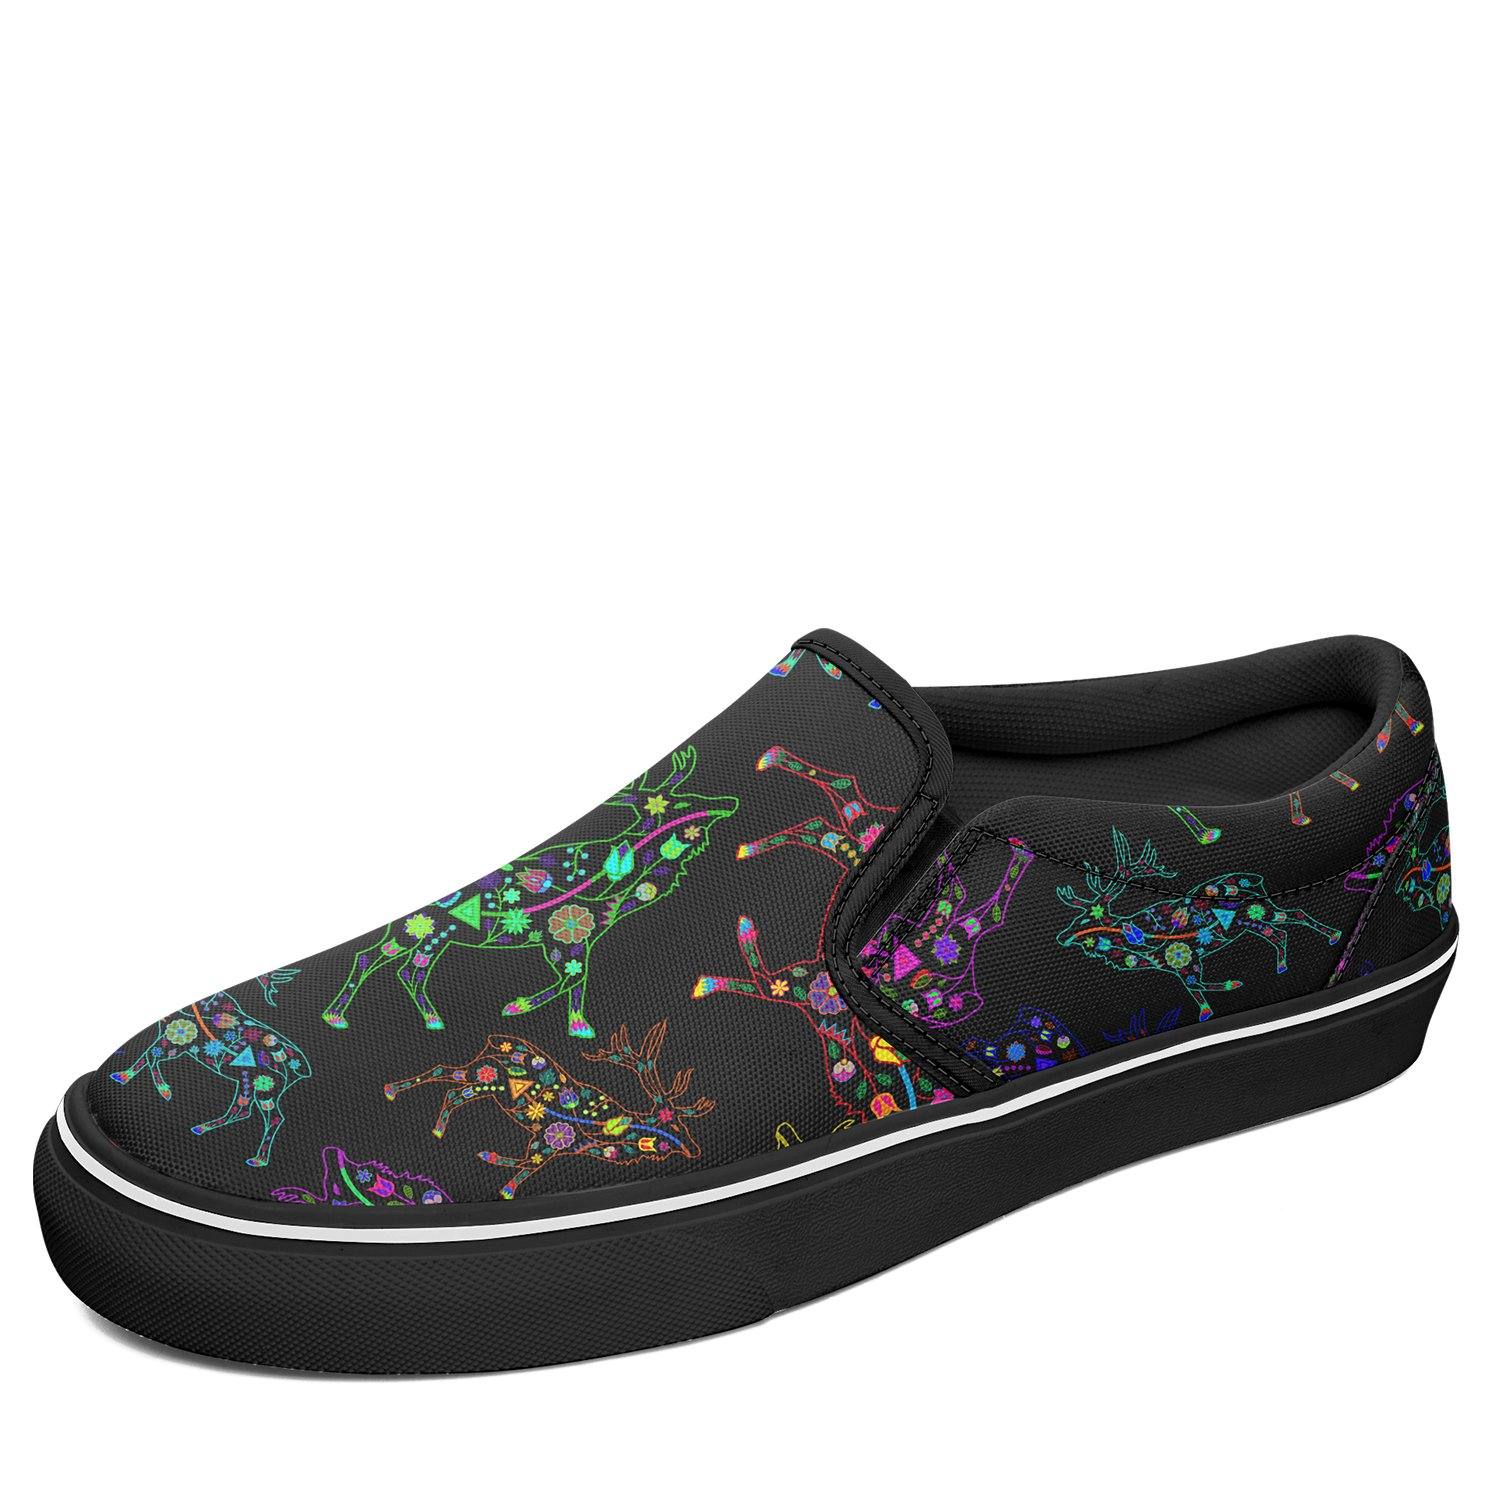 Floral Elk Otoyimm Canvas Slip On Shoes otoyimm Herman US Youth 1 / EUR 32 Black Sole 